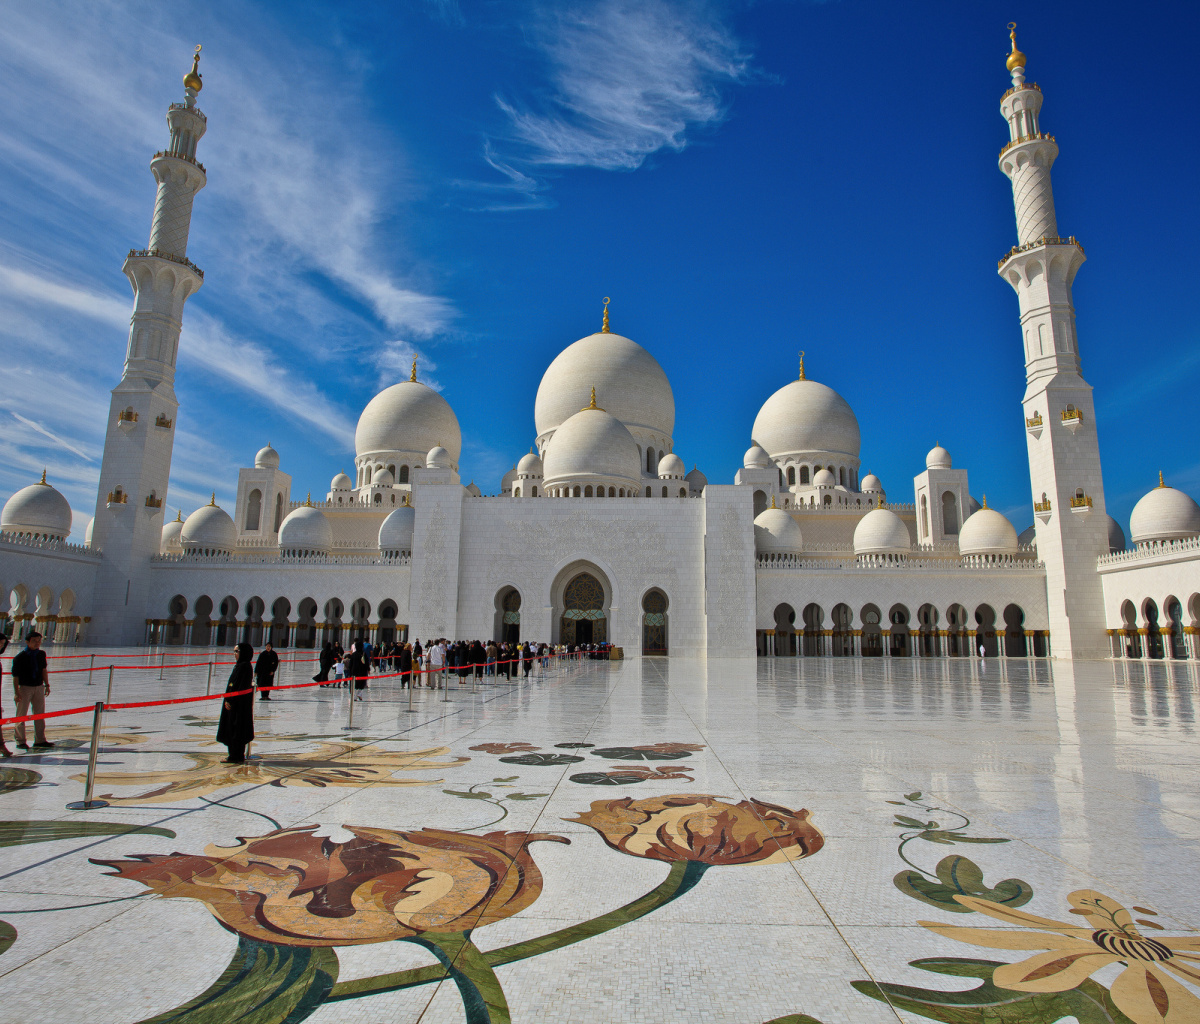 Sheikh Zayed Mosque located in Abu Dhabi wallpaper 1200x1024